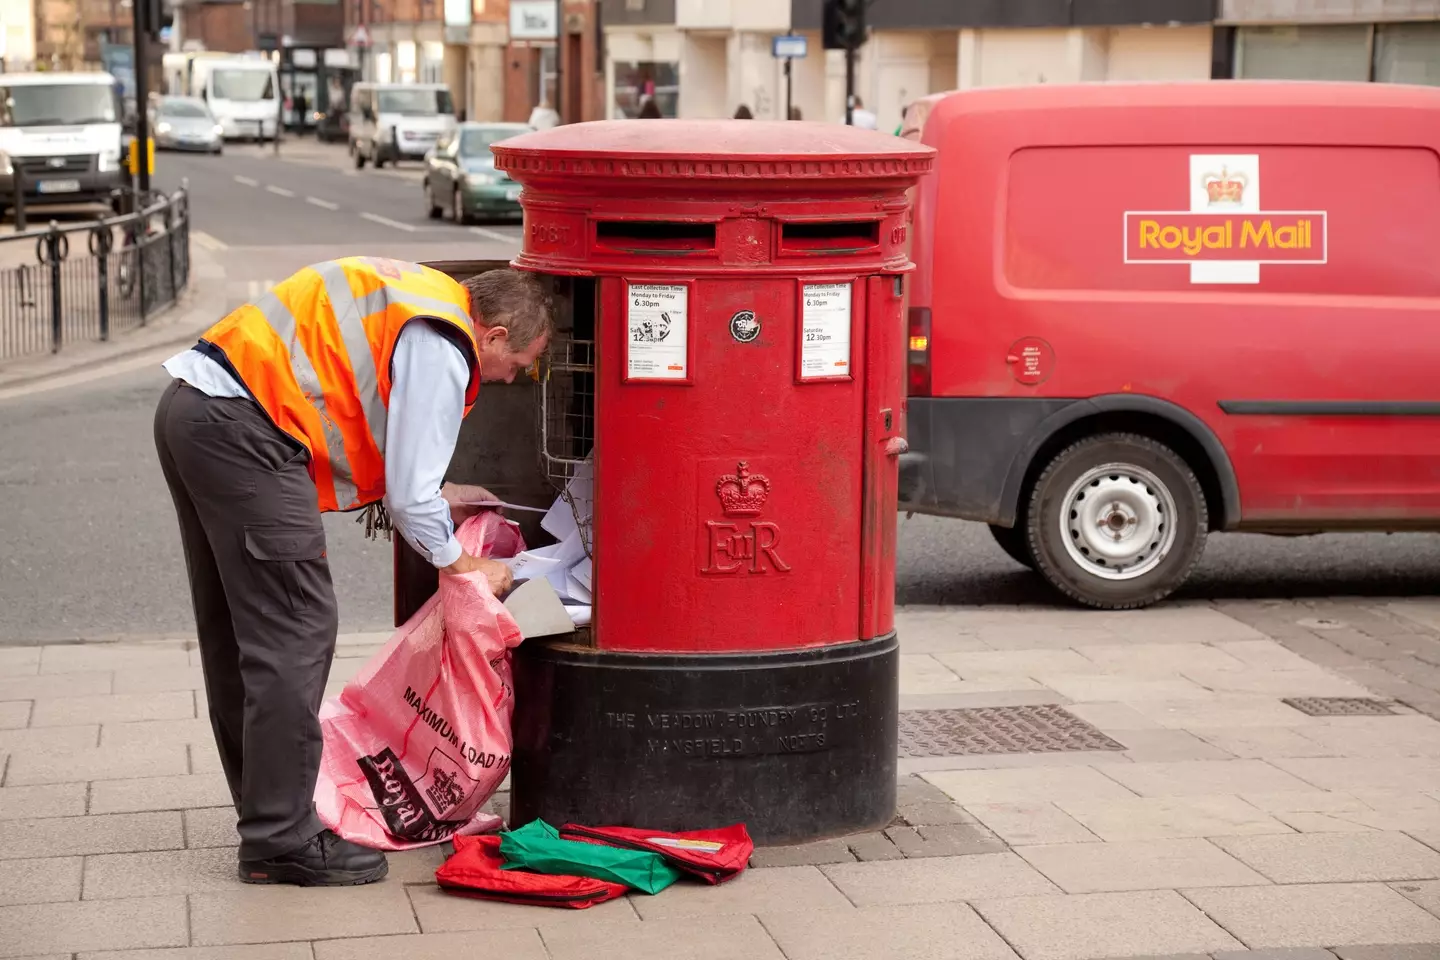 Royal Mail workers will strike on six dates in December.